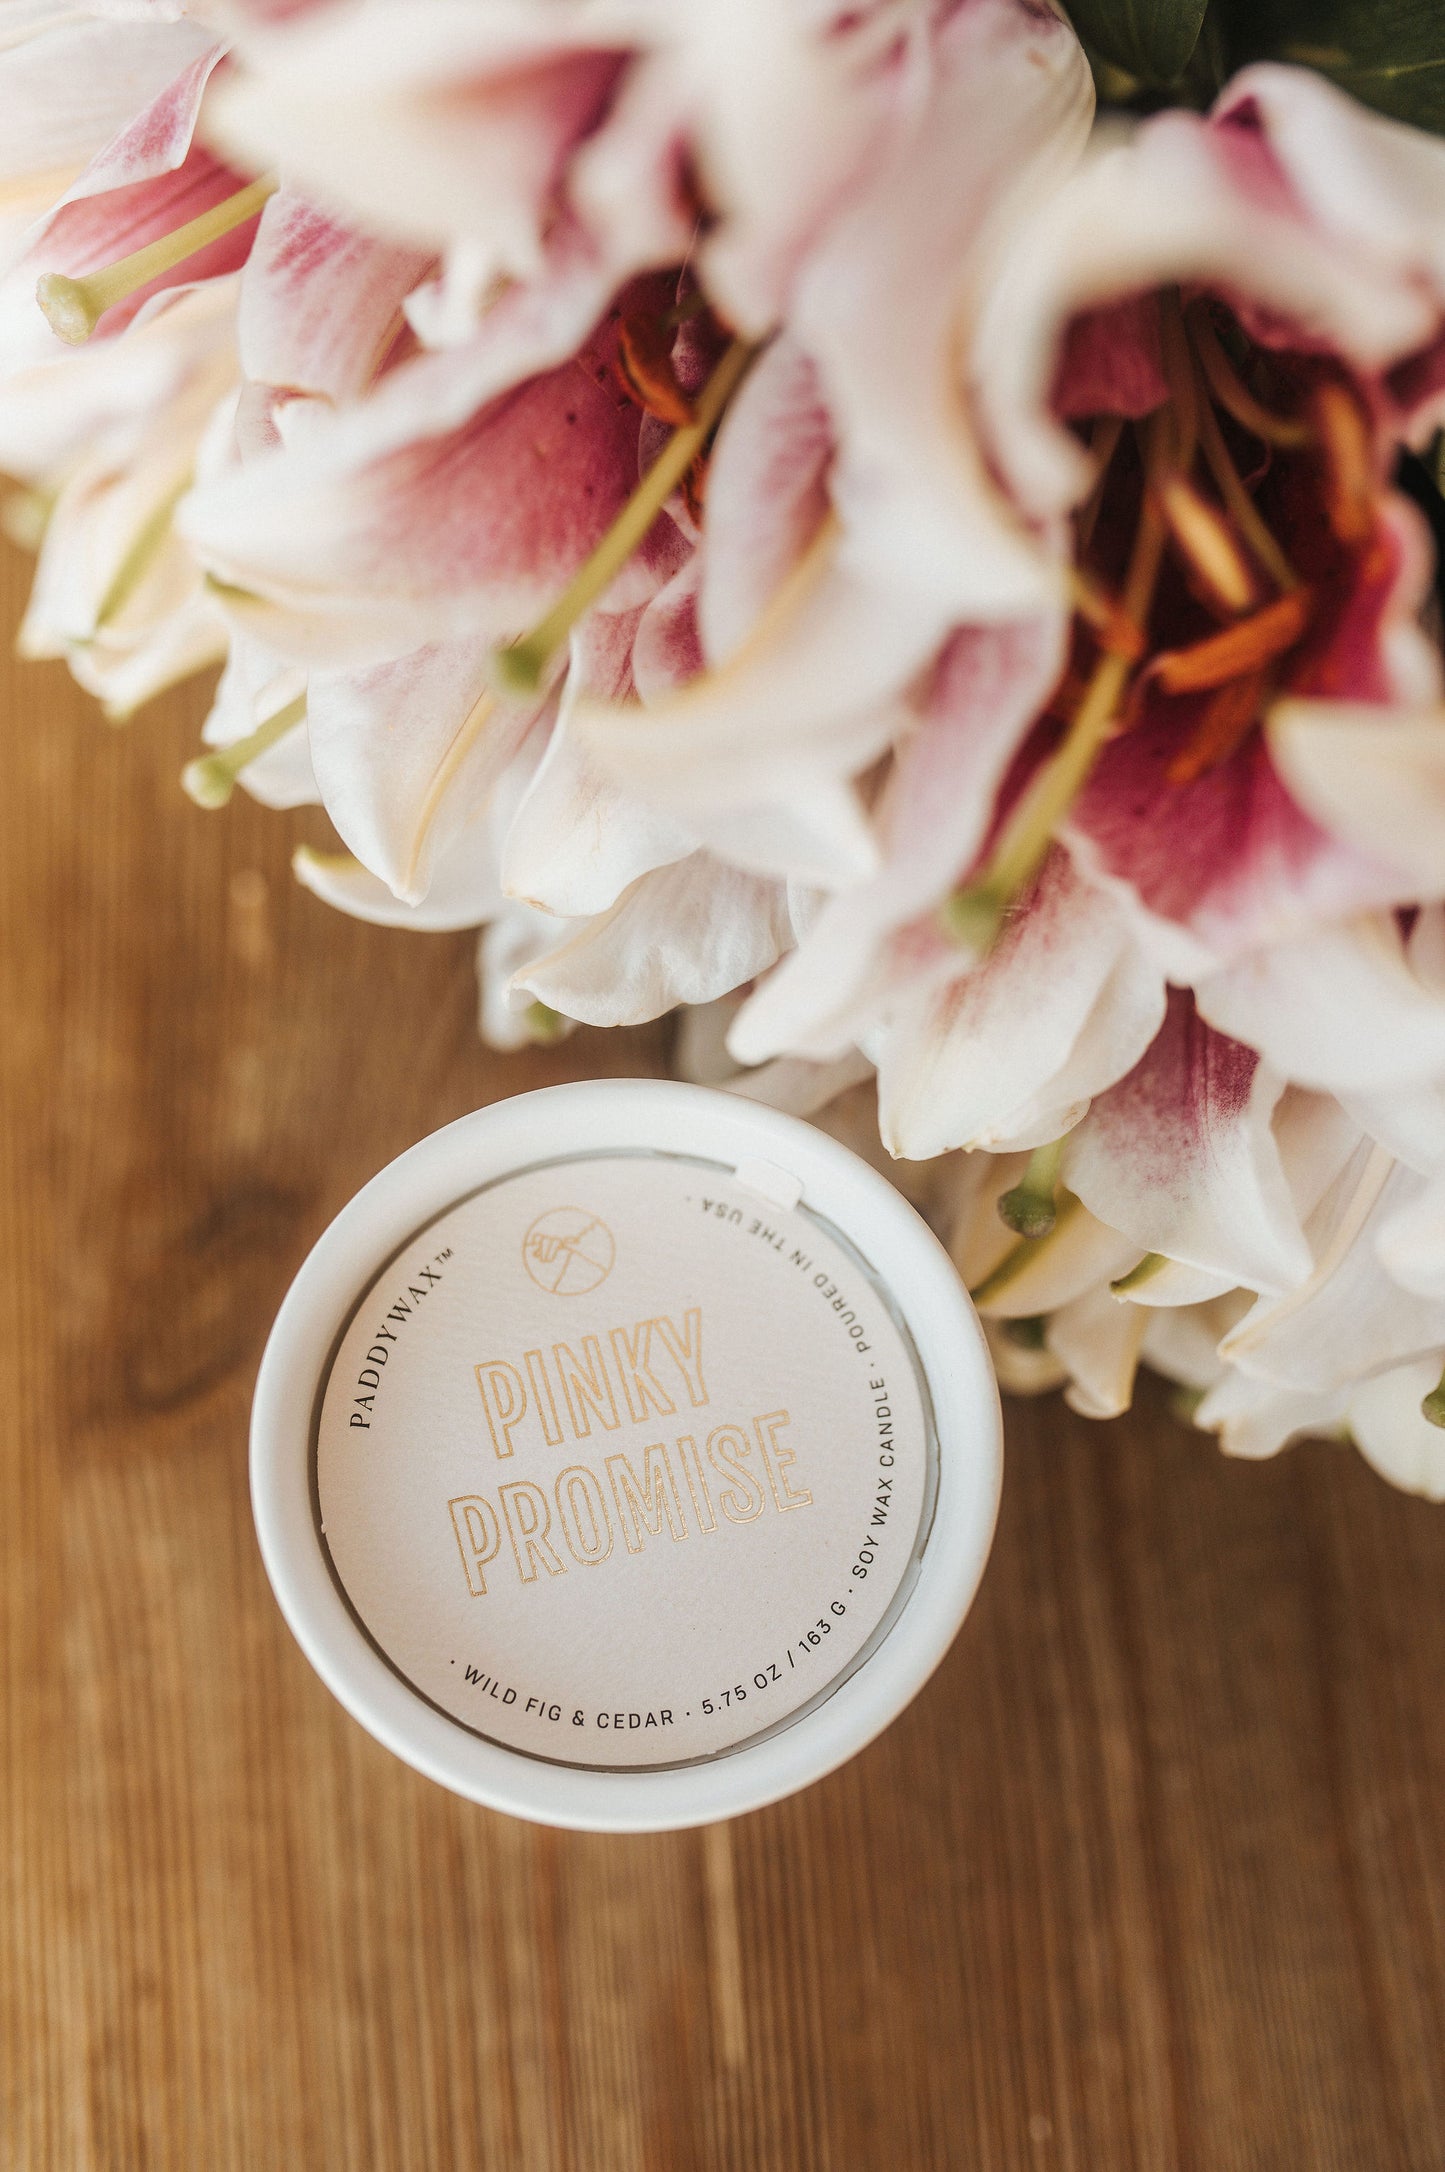 PADDYWAX Candle – Calily Flowerhouse